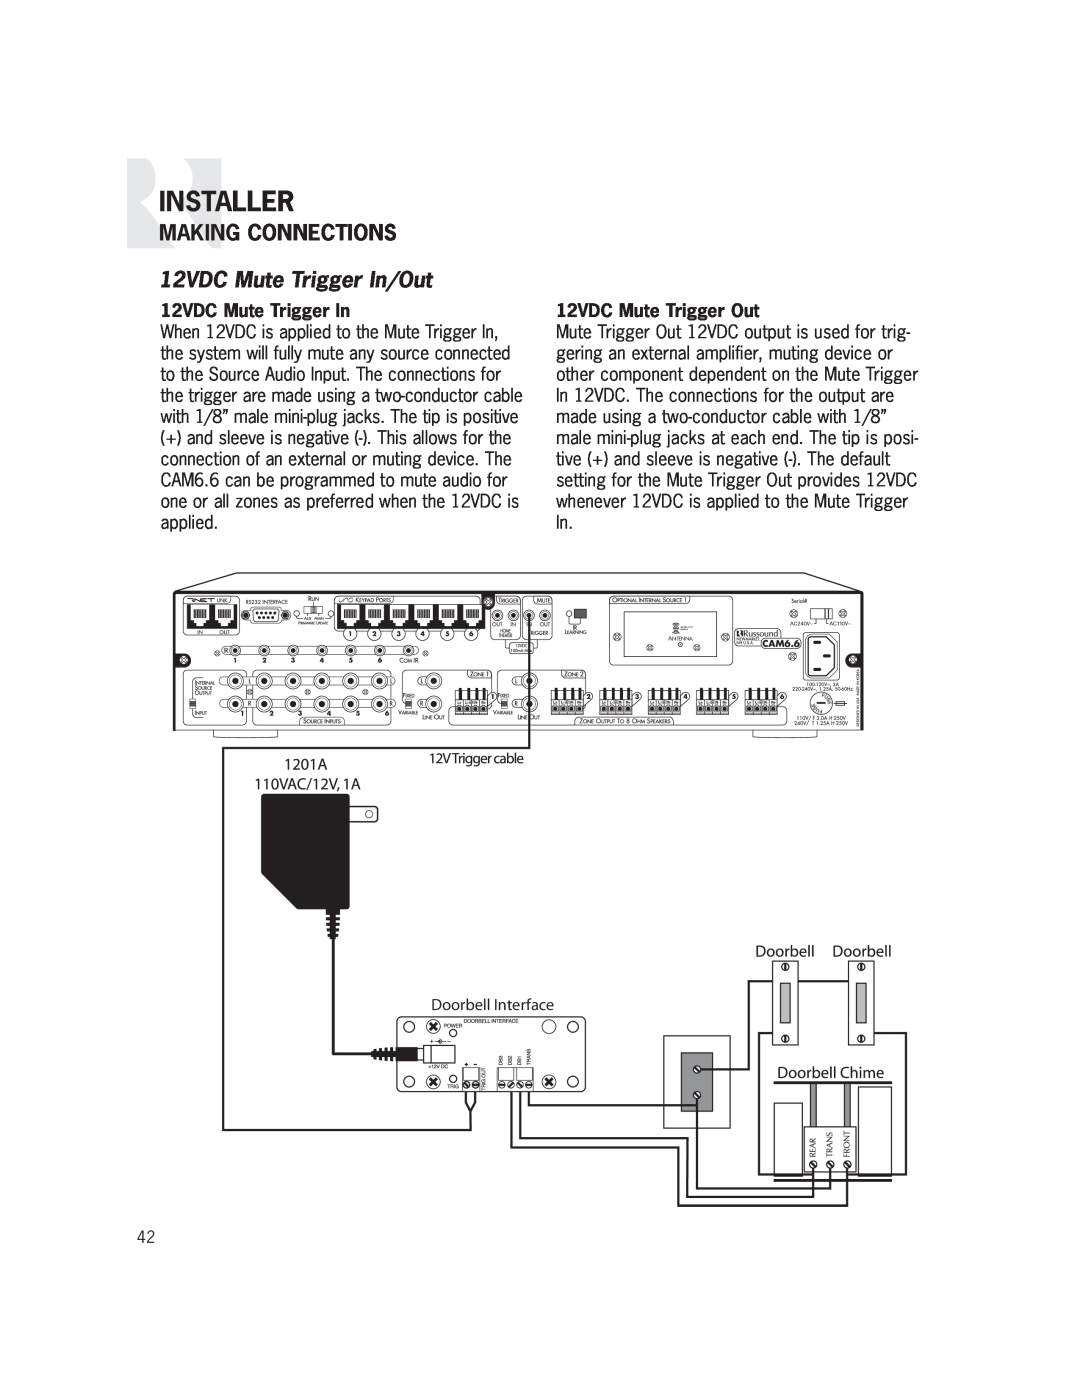 Russound CAM6.6X-S1/S2 instruction manual 12VDC Mute Trigger In/Out, 12VDC Mute Trigger Out, Installer, Making Connections 